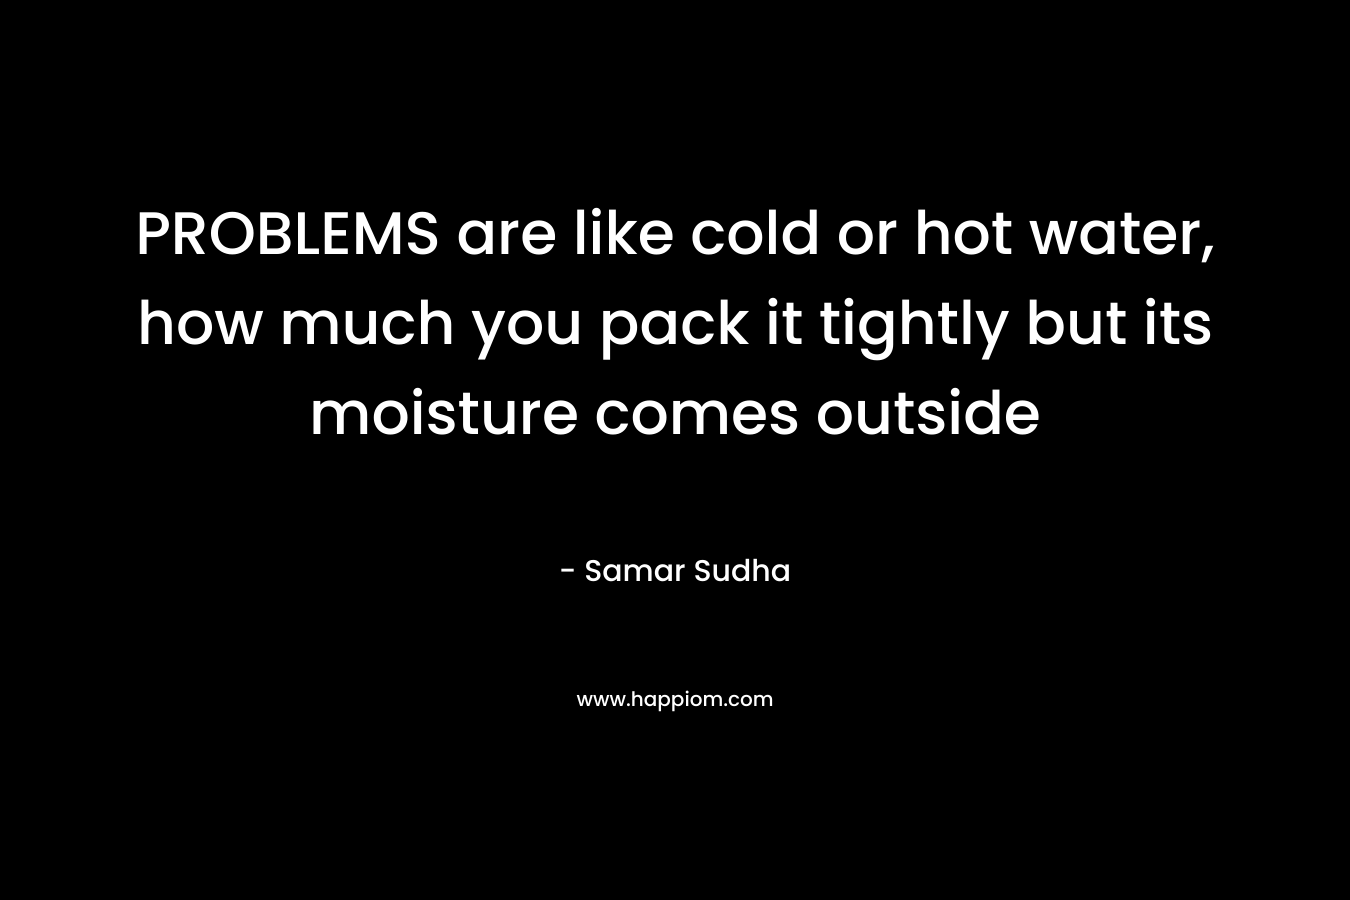 PROBLEMS are like cold or hot water, how much you pack it tightly but its moisture comes outside